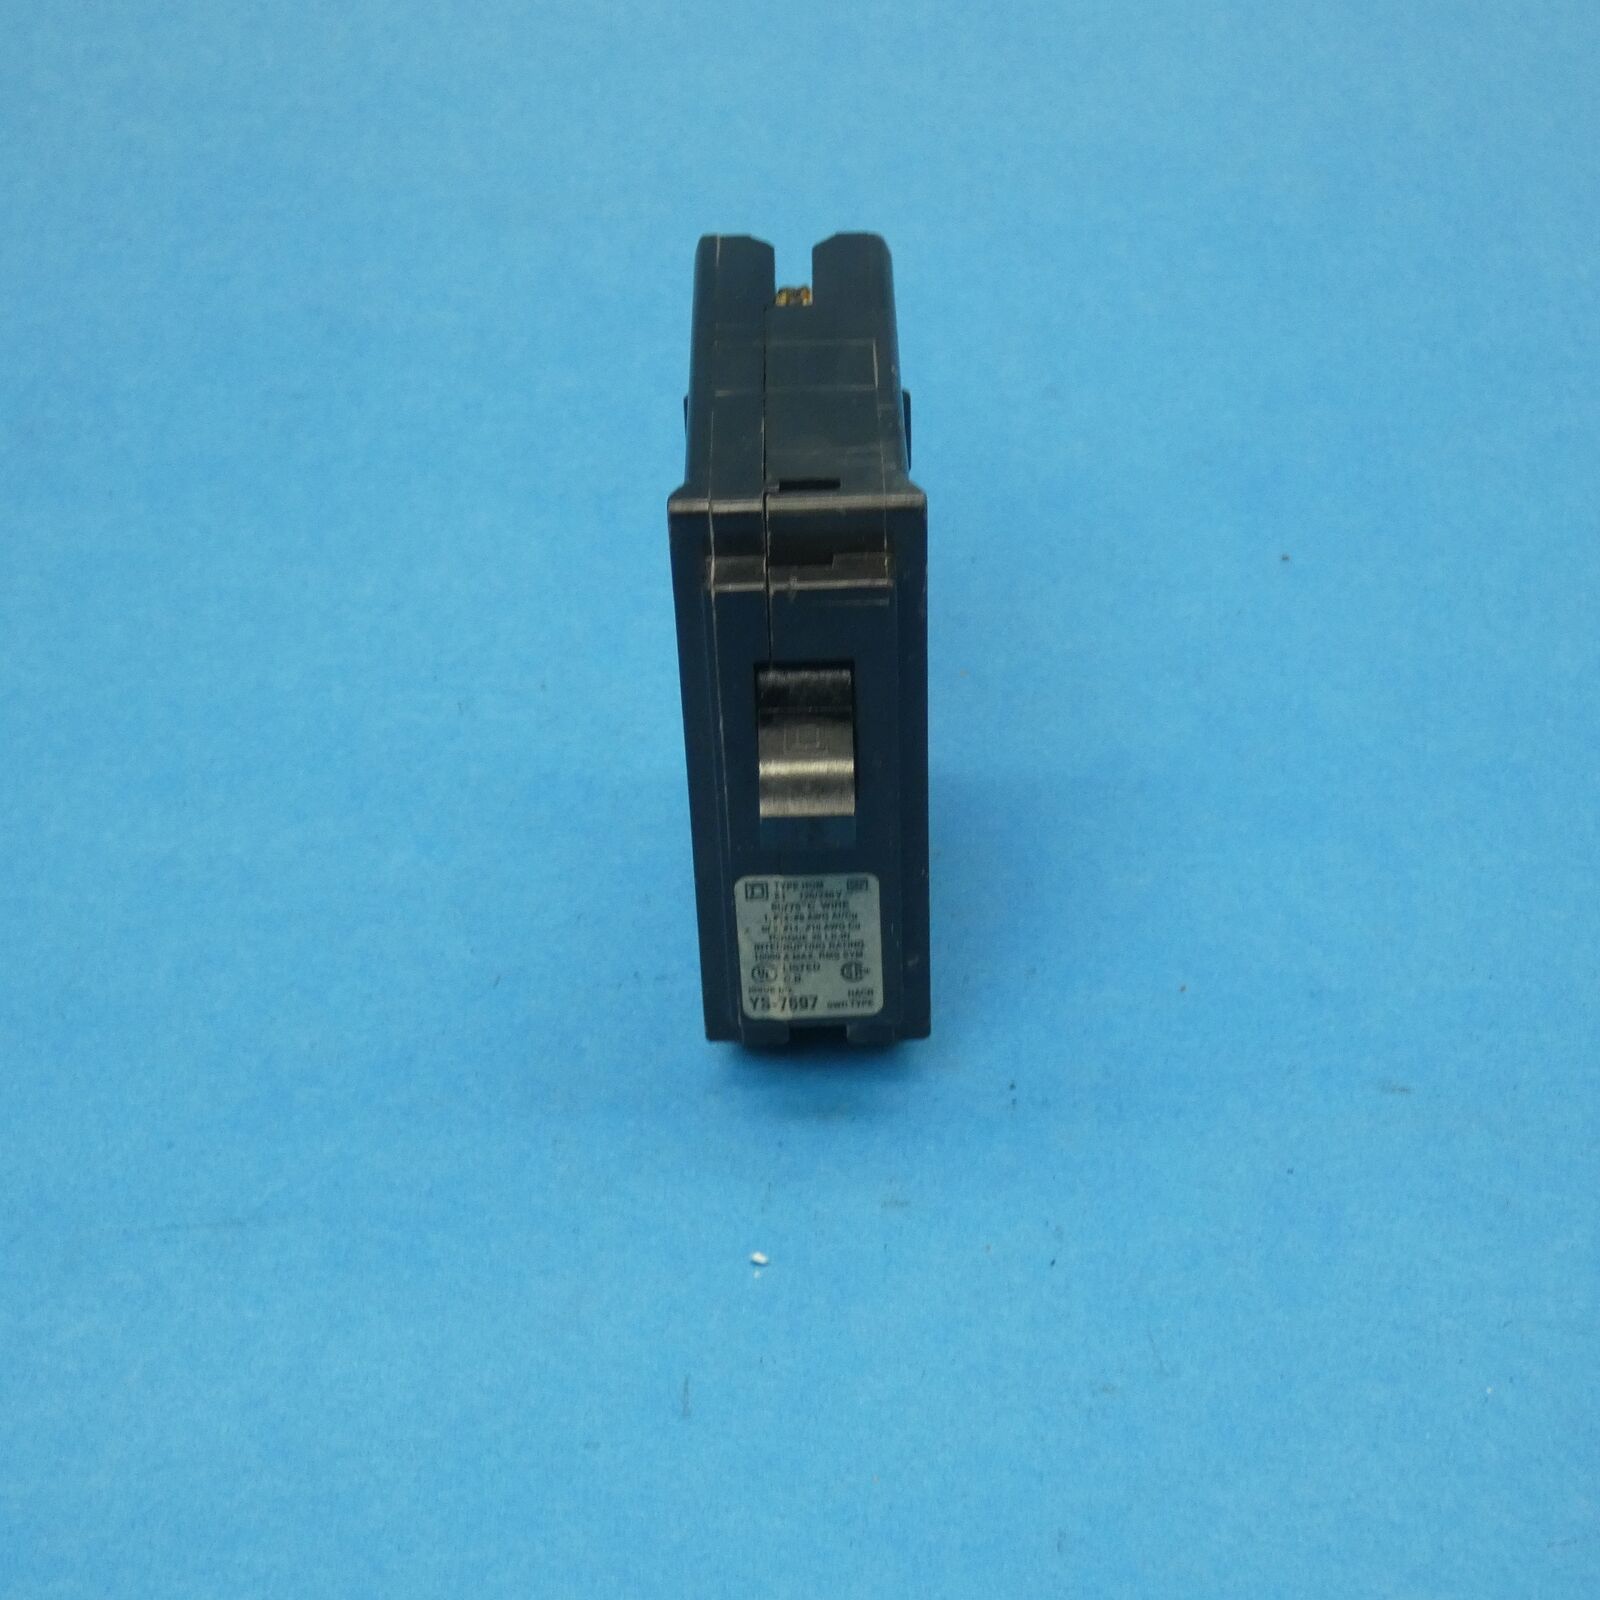 Primary image for Square D HOM120 Homeline Circuit Breaker 1 Pole 20 Amps 120/240VAC